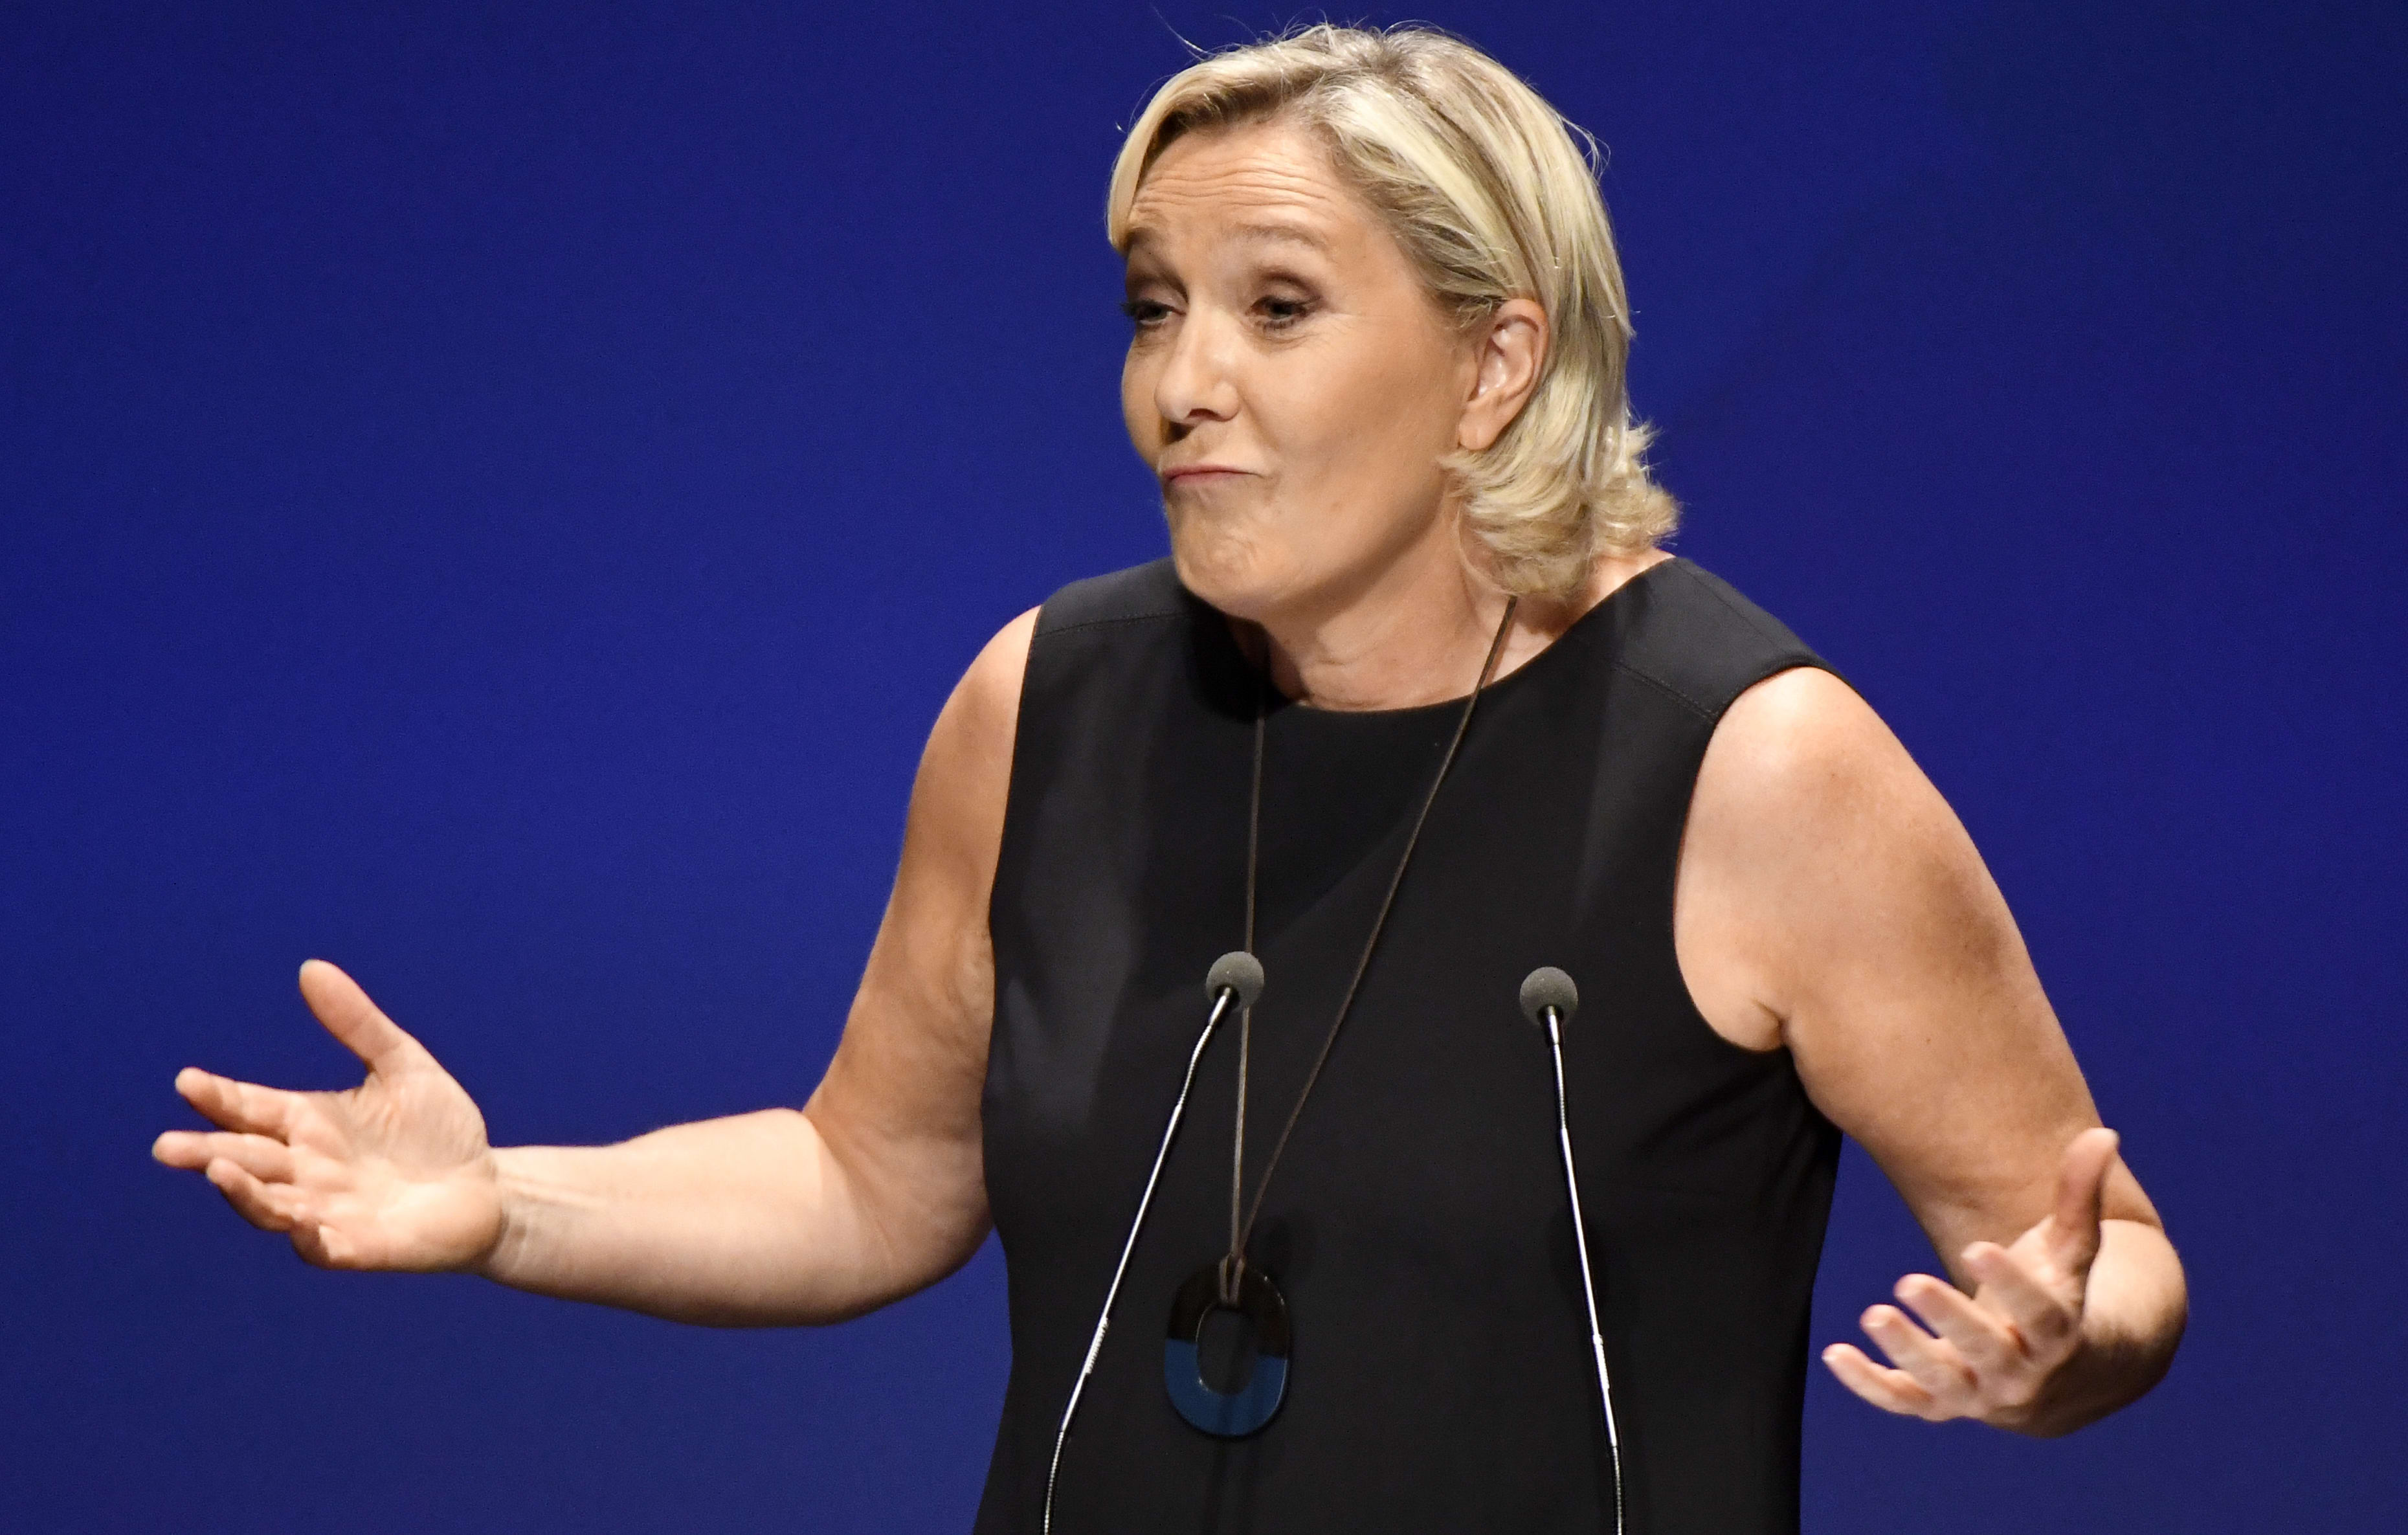 Leader of France's far-right political party Marine Le Pen.